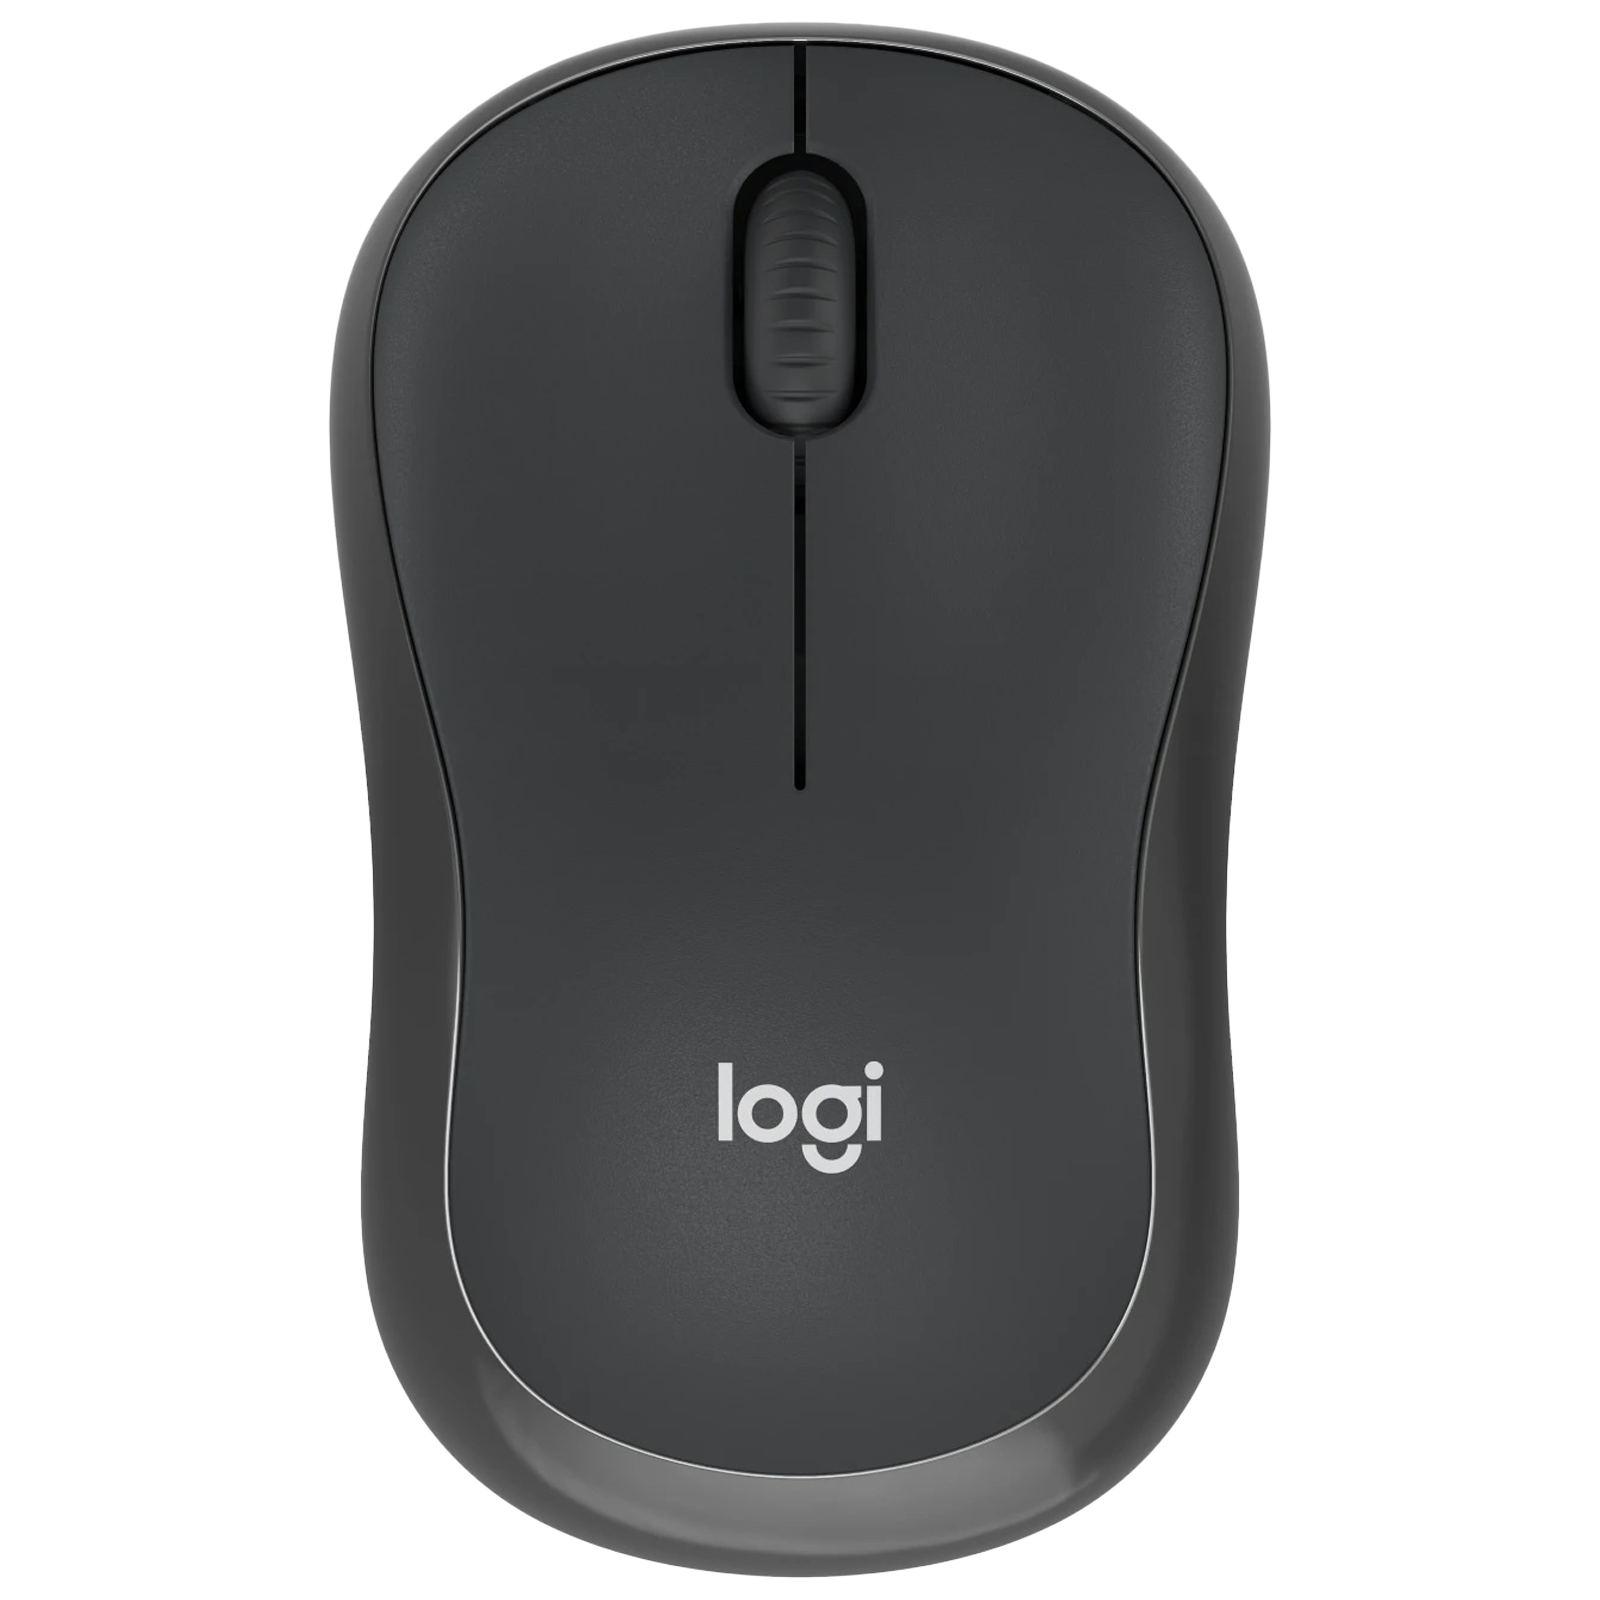 Buy High Precision Wireless Mouse Online at Best Prices